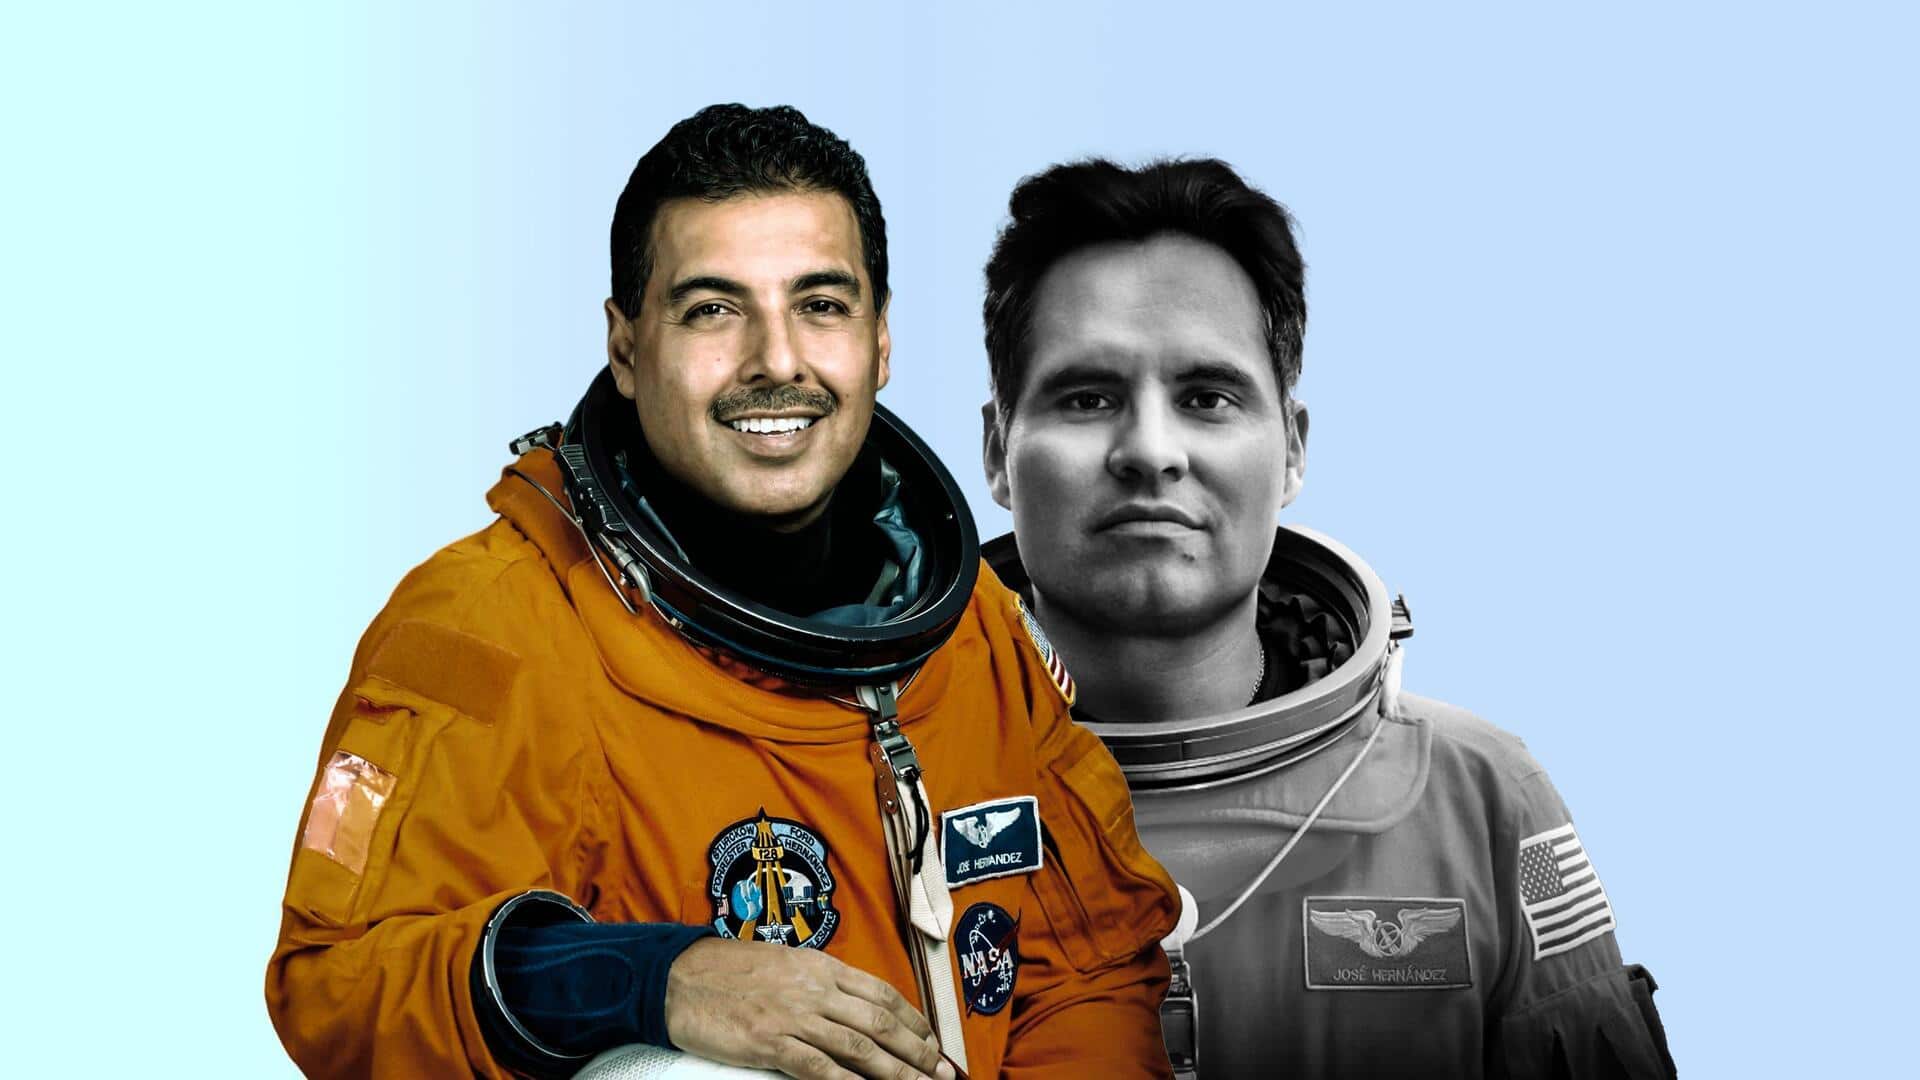 'A Million Miles Away'—José Hernández's story, from migrant to astronaut